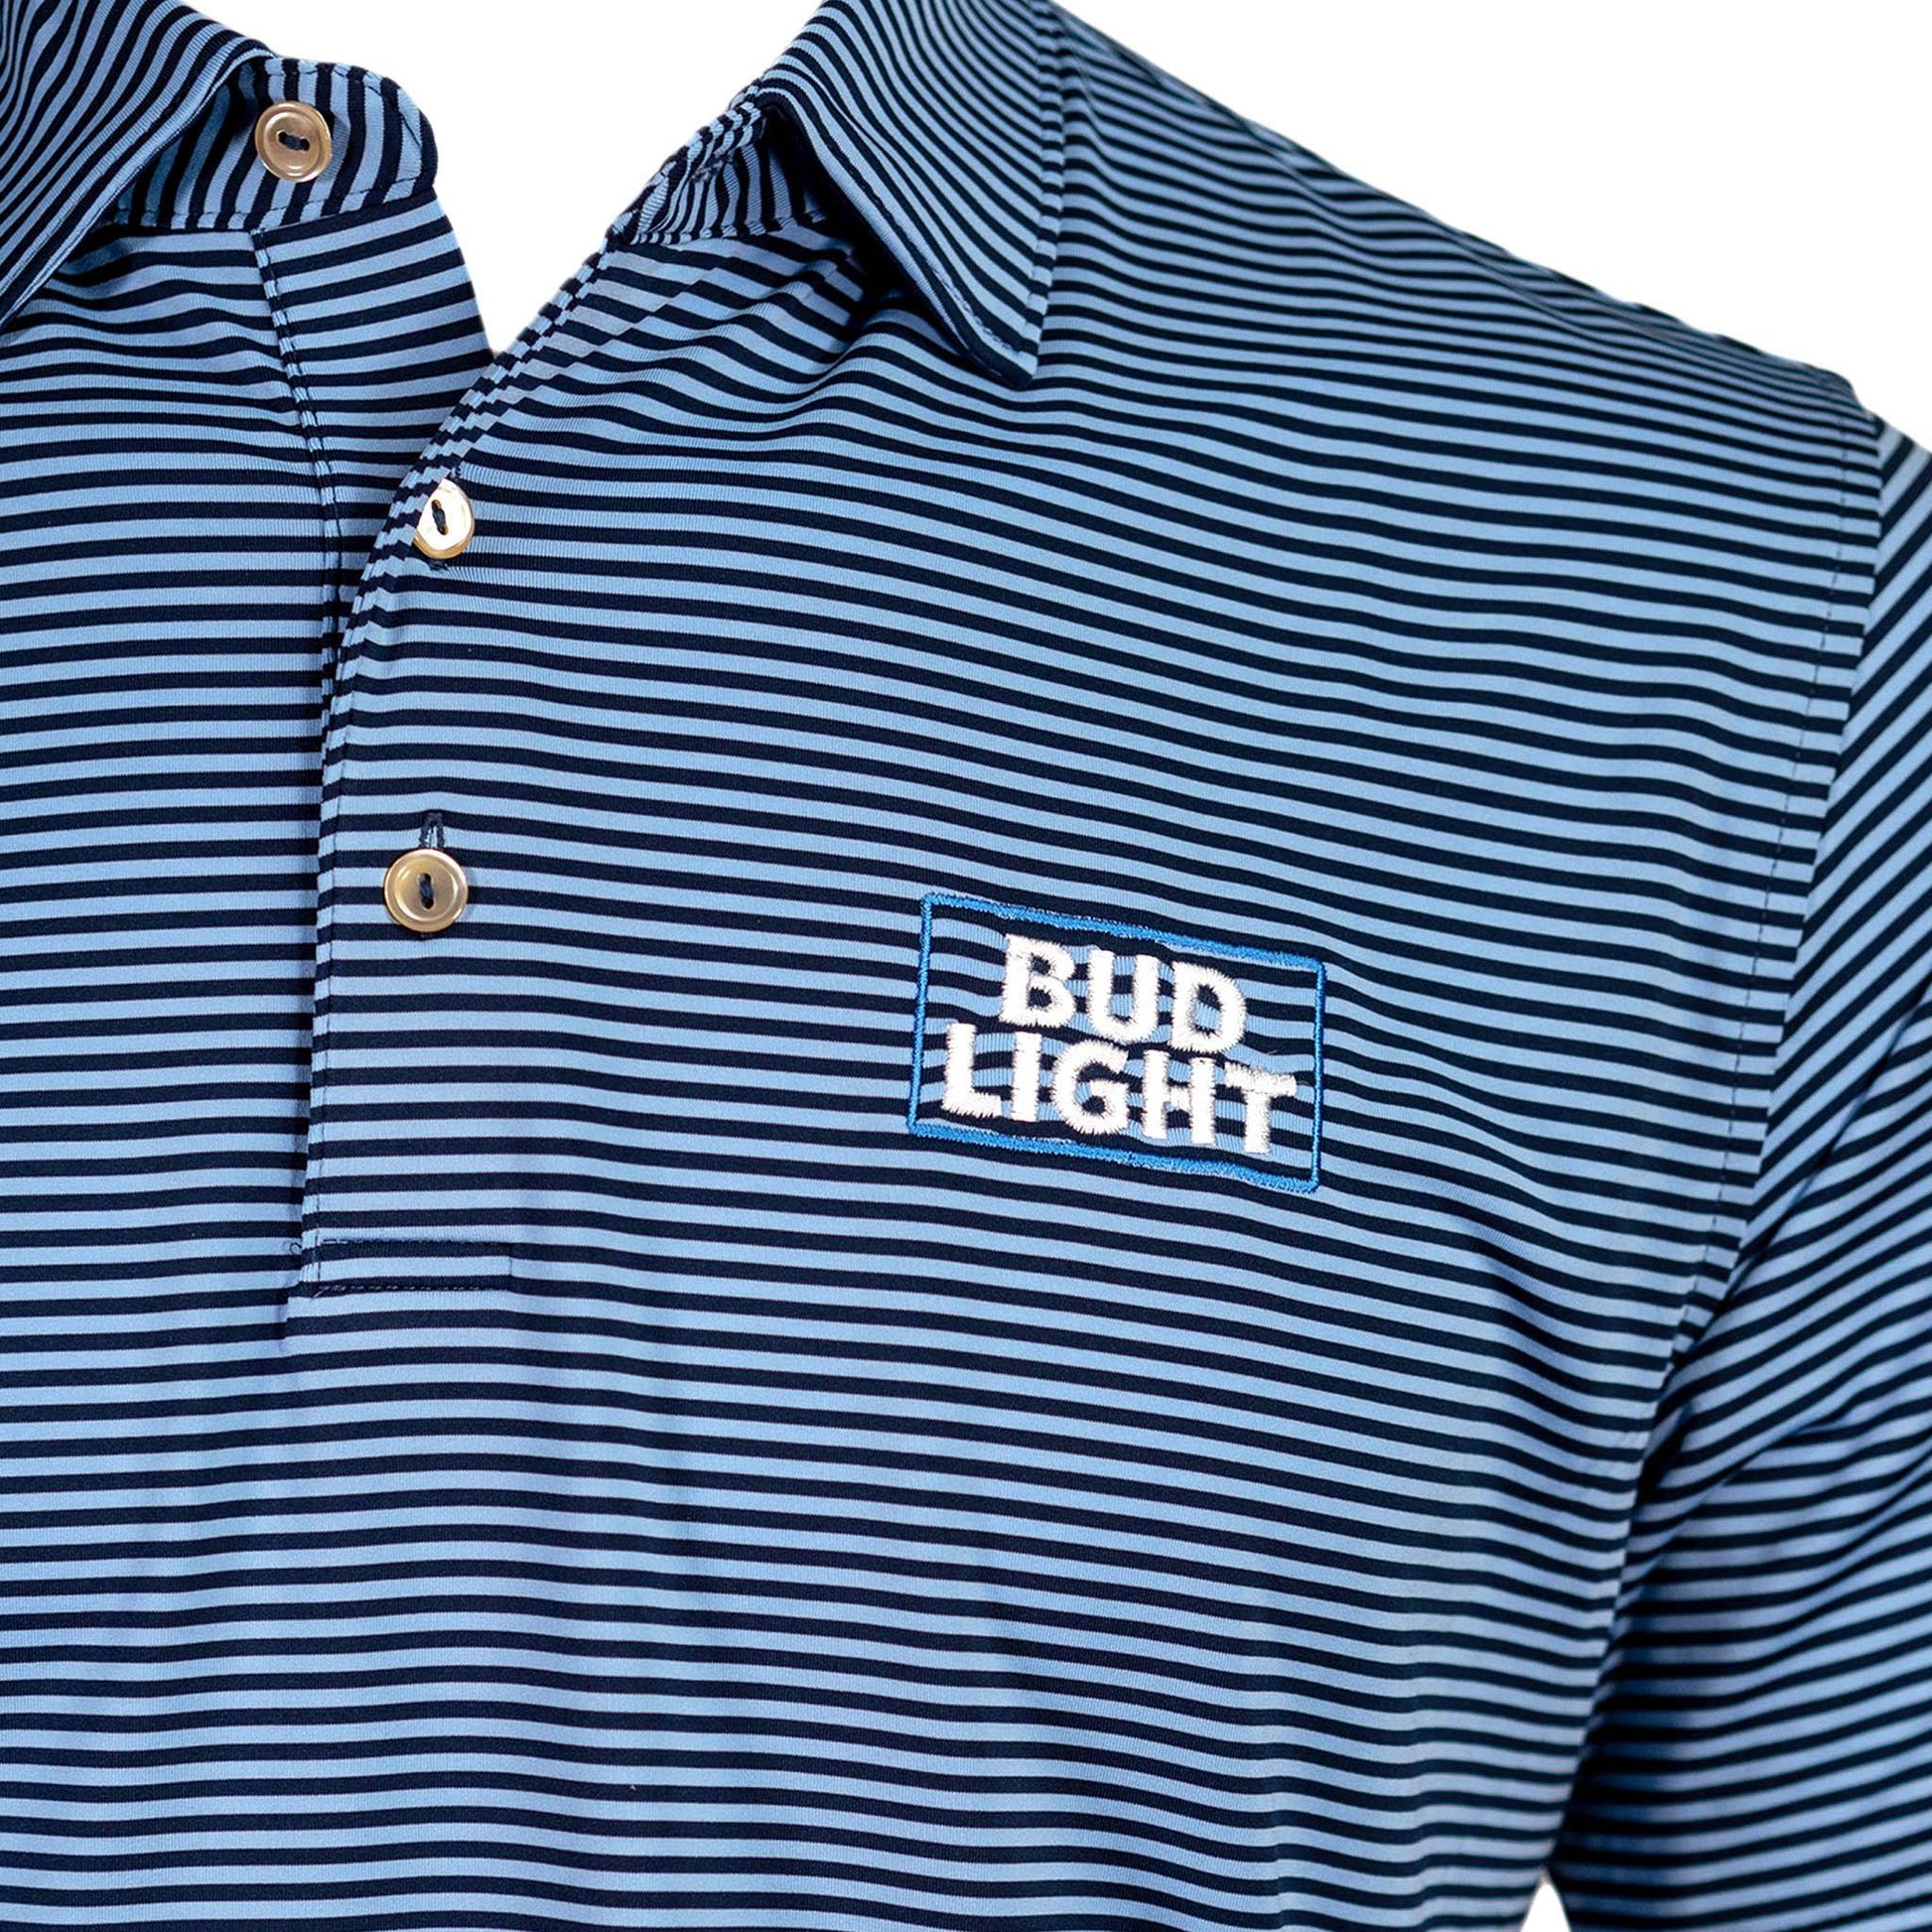 Close up of embroidered stacked Bud Light logo on front left chest of polo